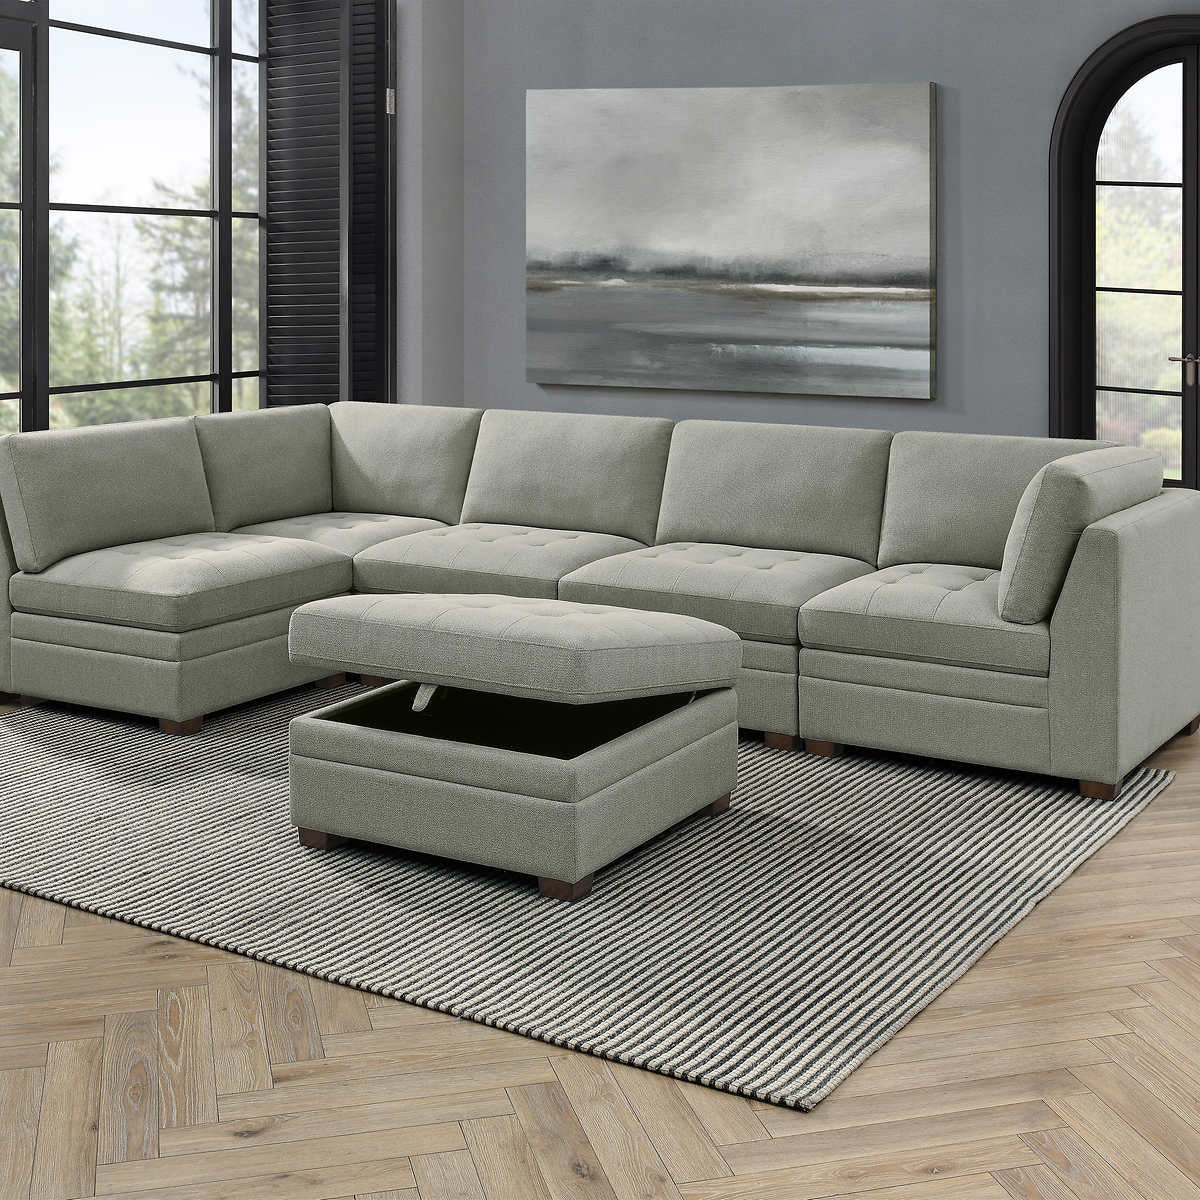 Thomasville Tisdale 6-piece Sectional in Boucle Fabric with Storage Ottoman